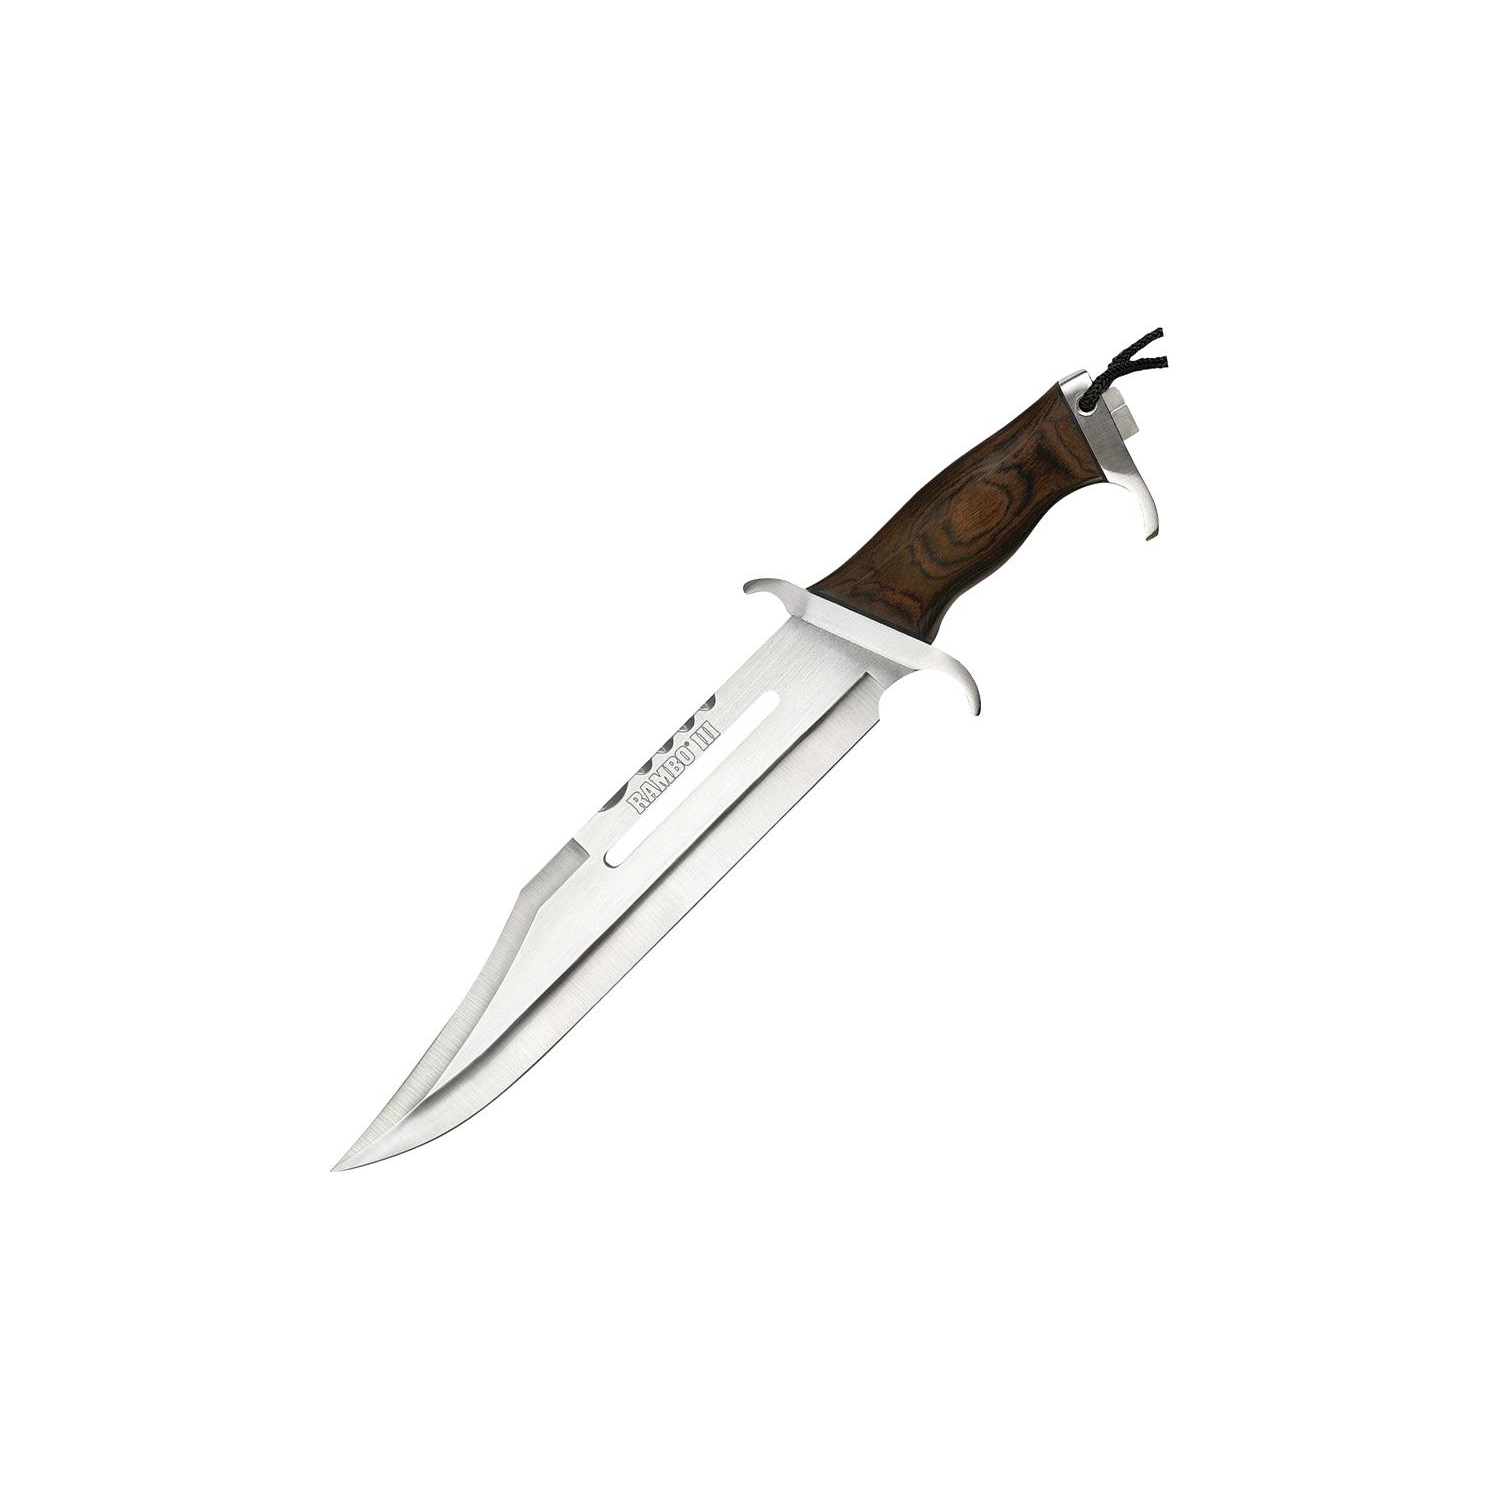 Rambo: First Blood Part III Standard Edition Fixed Blade Knife RB9296